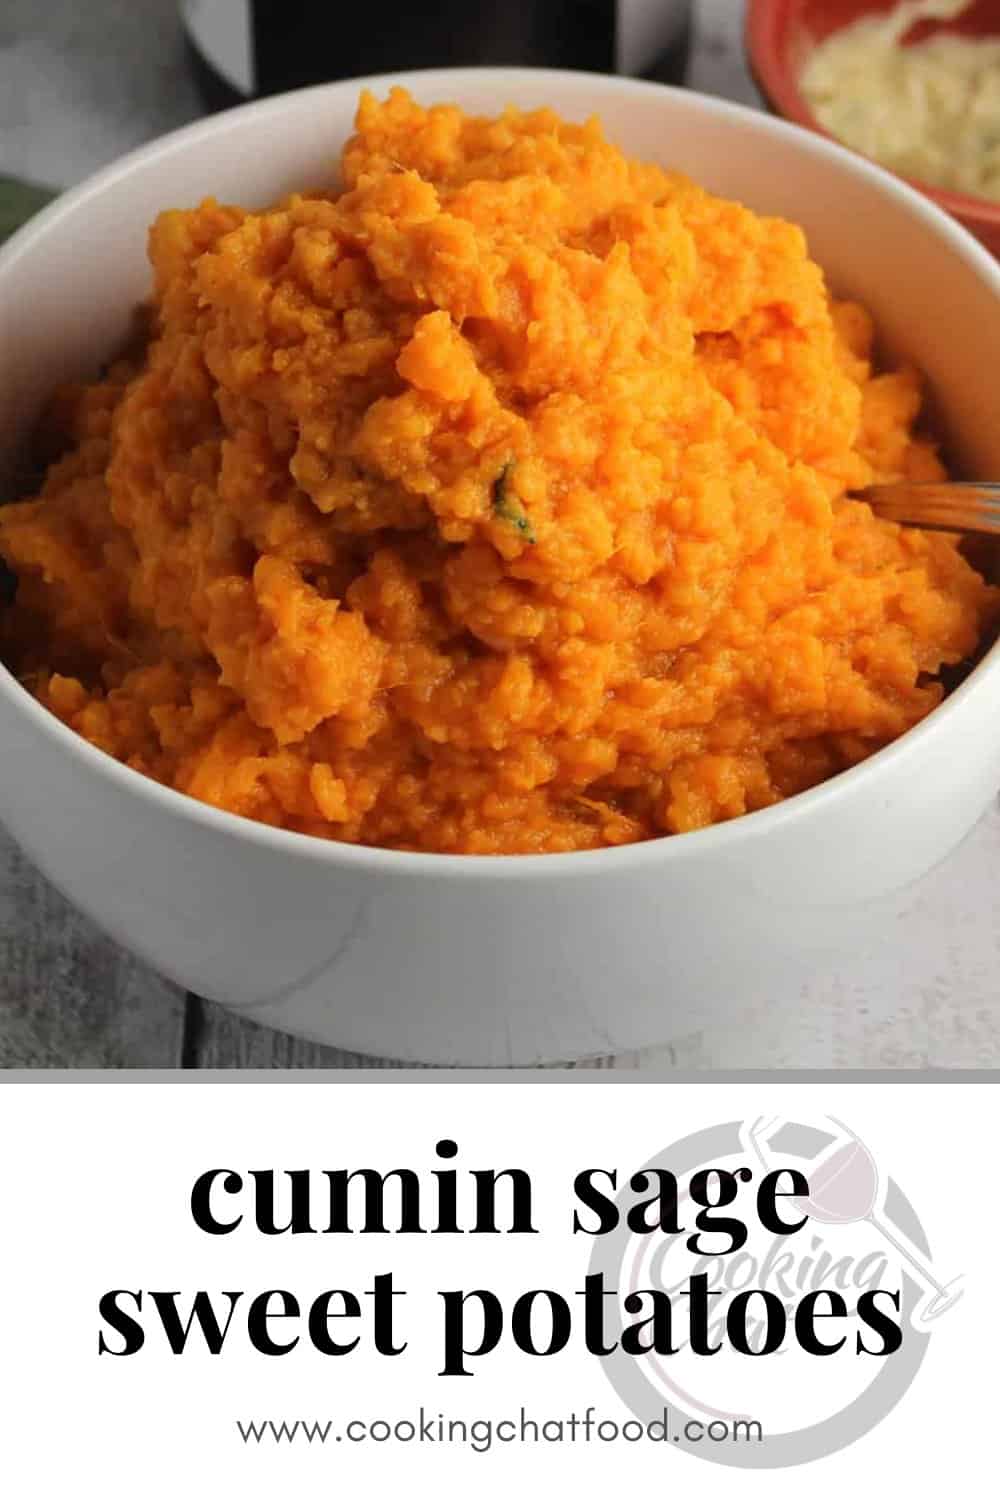 bowl of mashed sweet potatoes with text underneath that says cumin sage sweet potatoes.